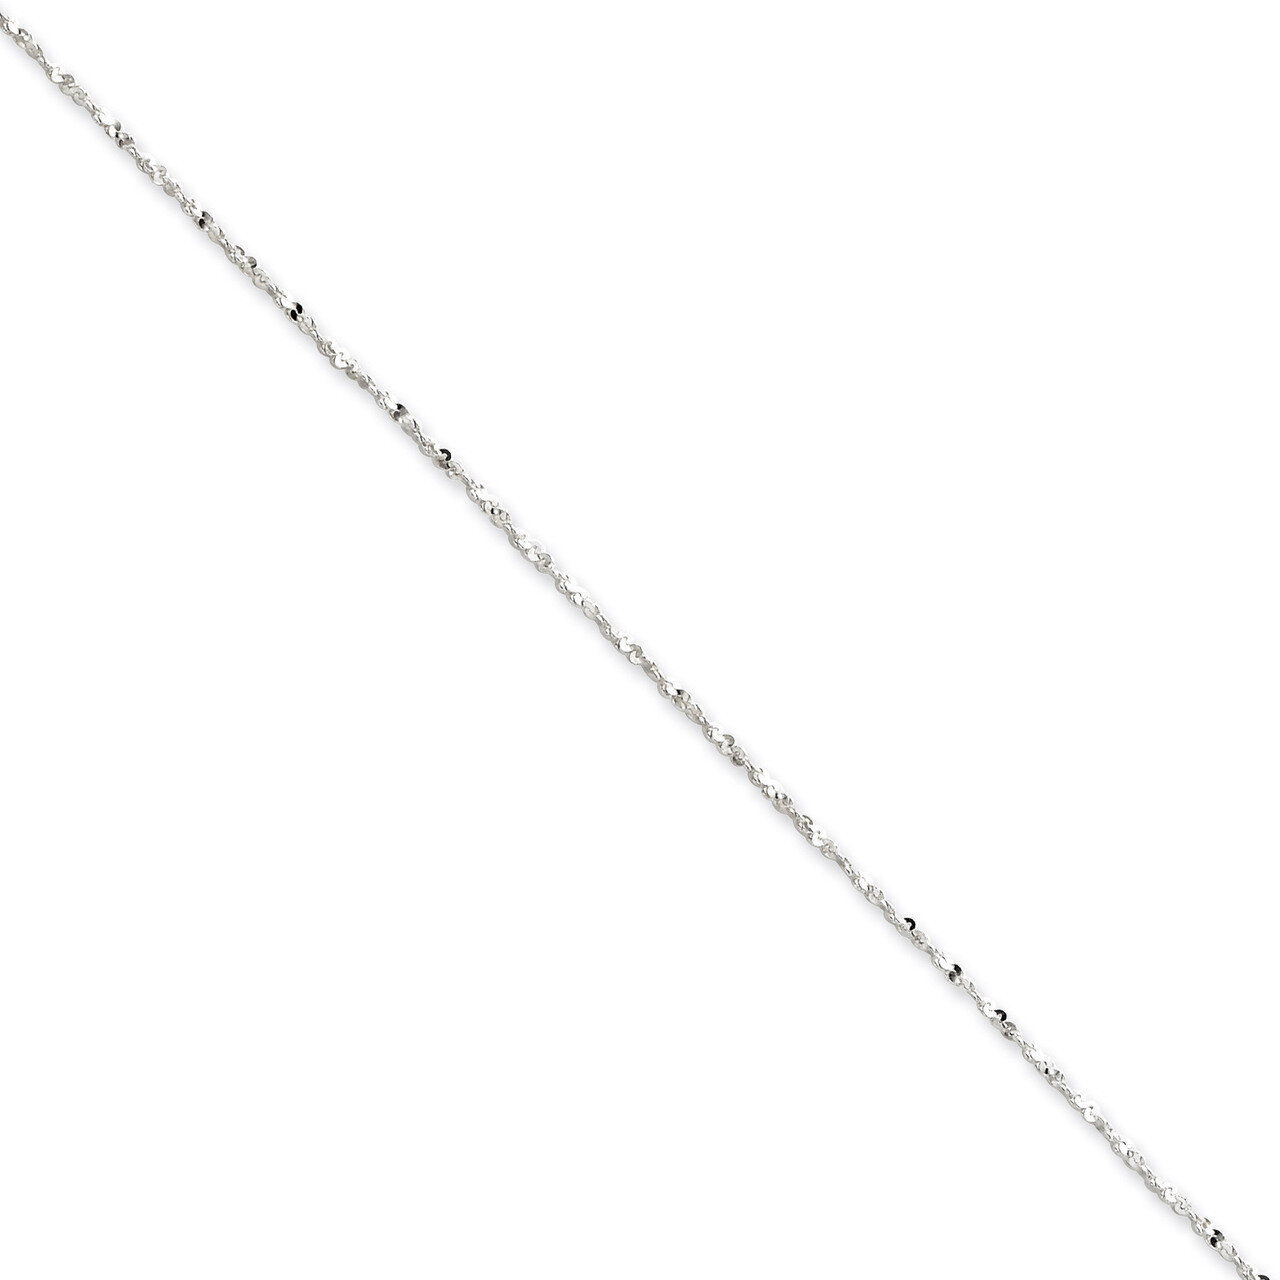 16 Inch 1.2mm Twisted Serpentine Chain Sterling Silver QPEN6-16